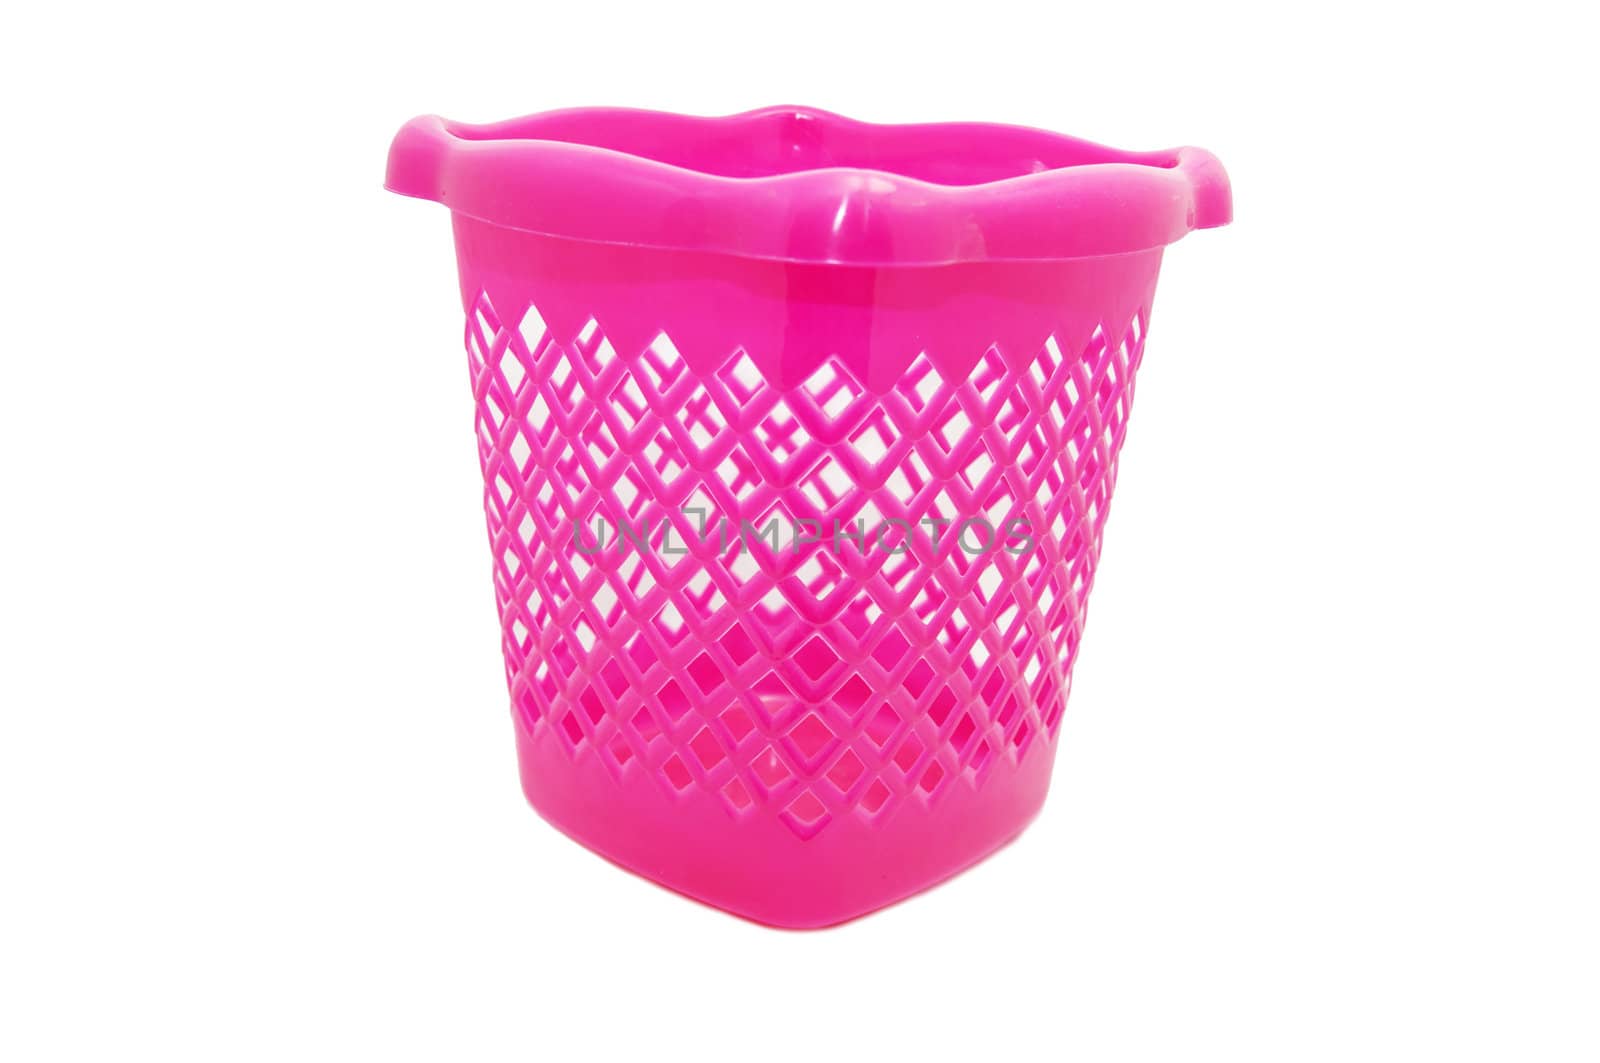 plastic trash can on a white background